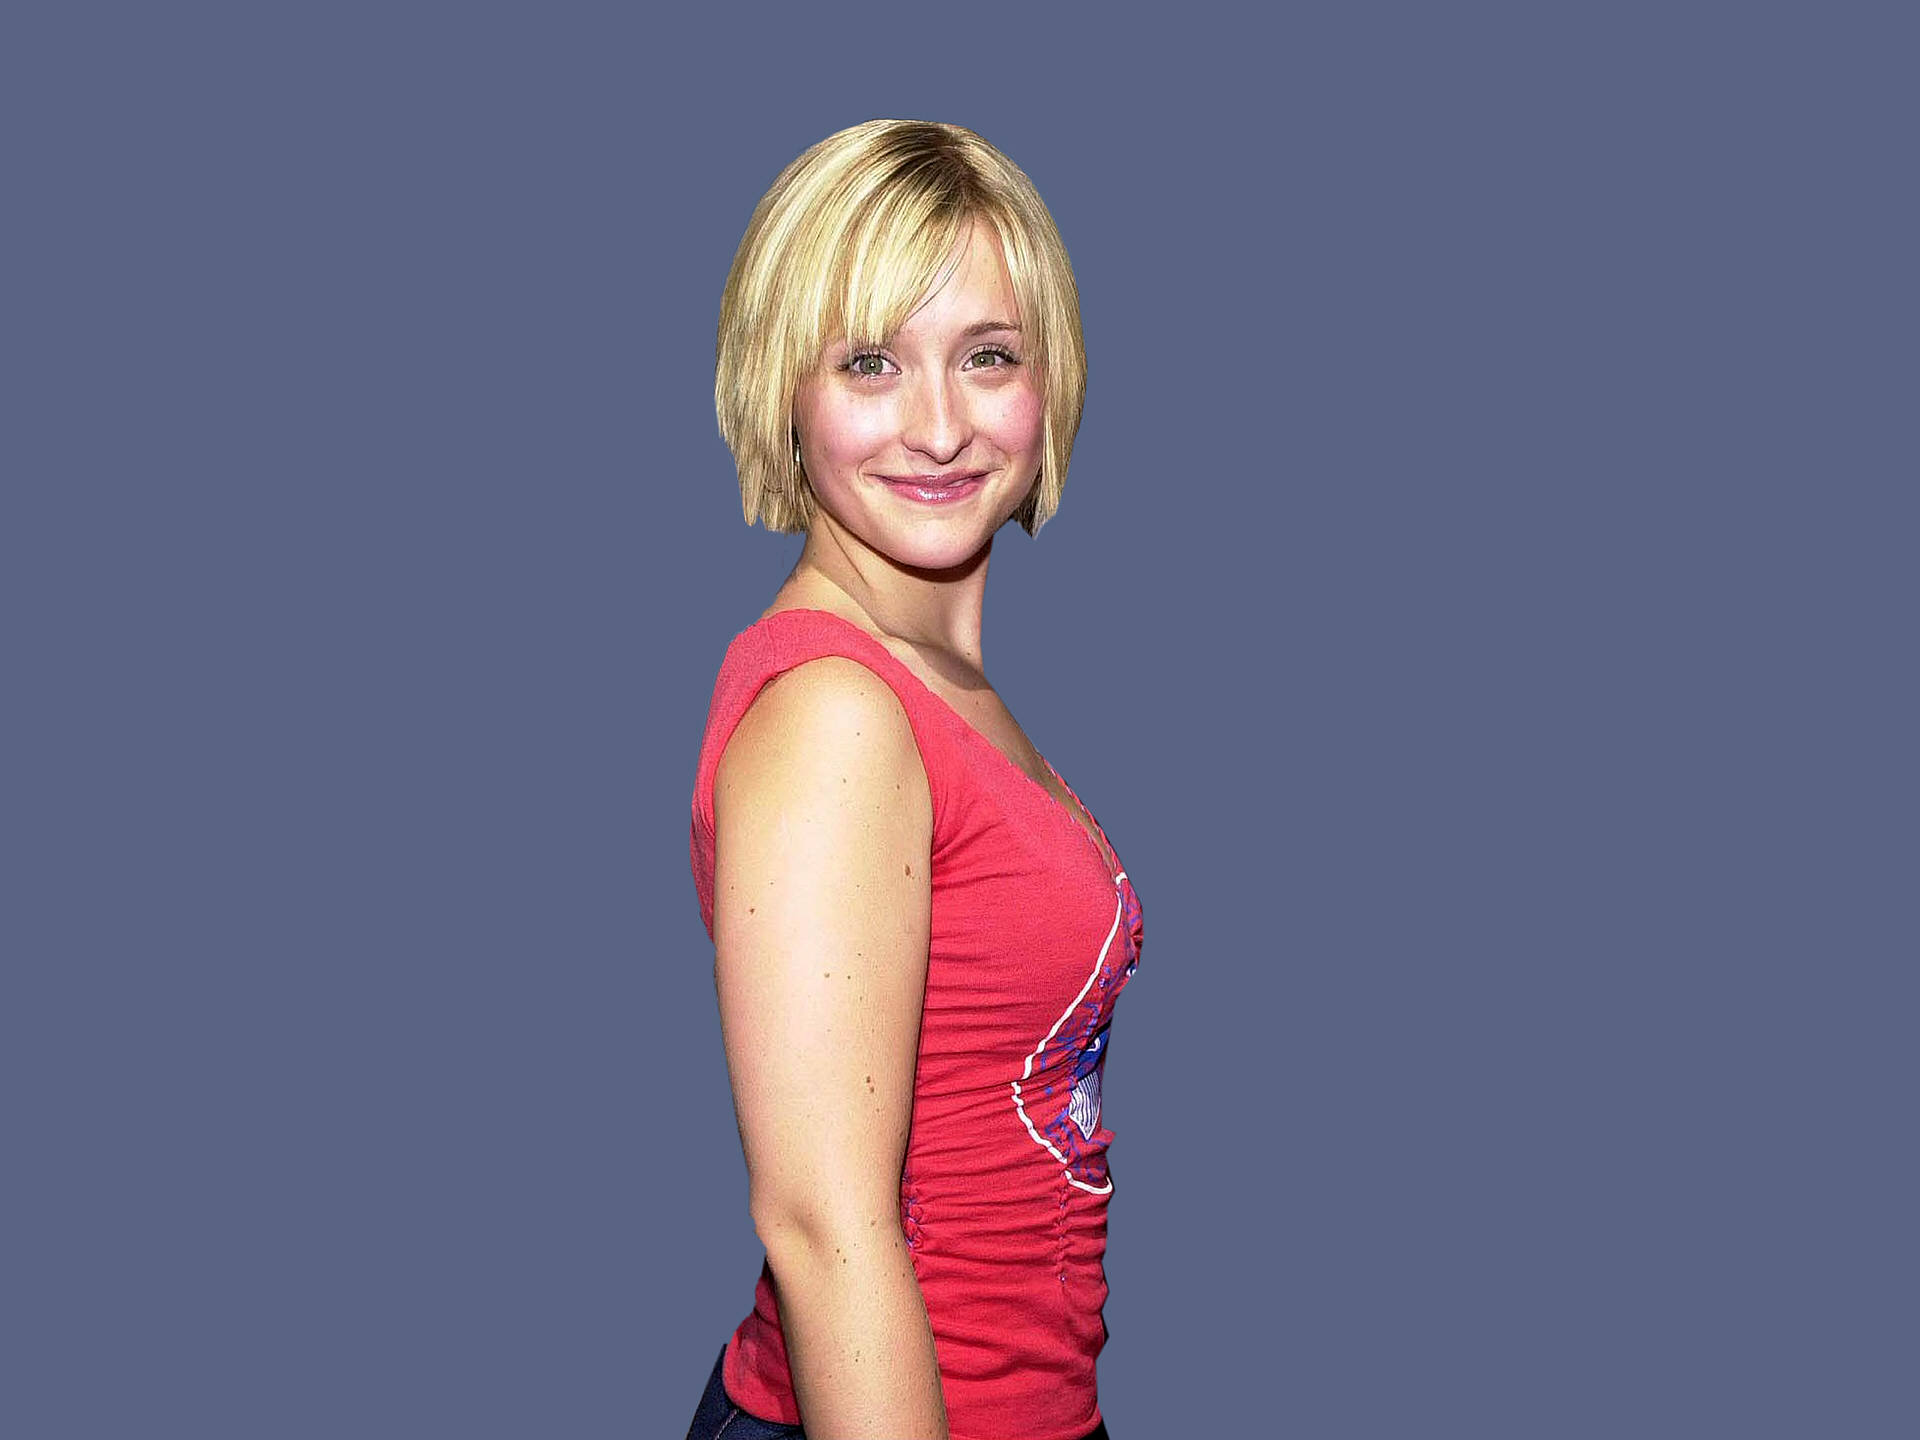 An American actress producer and director Allison Mack is popular for playi...